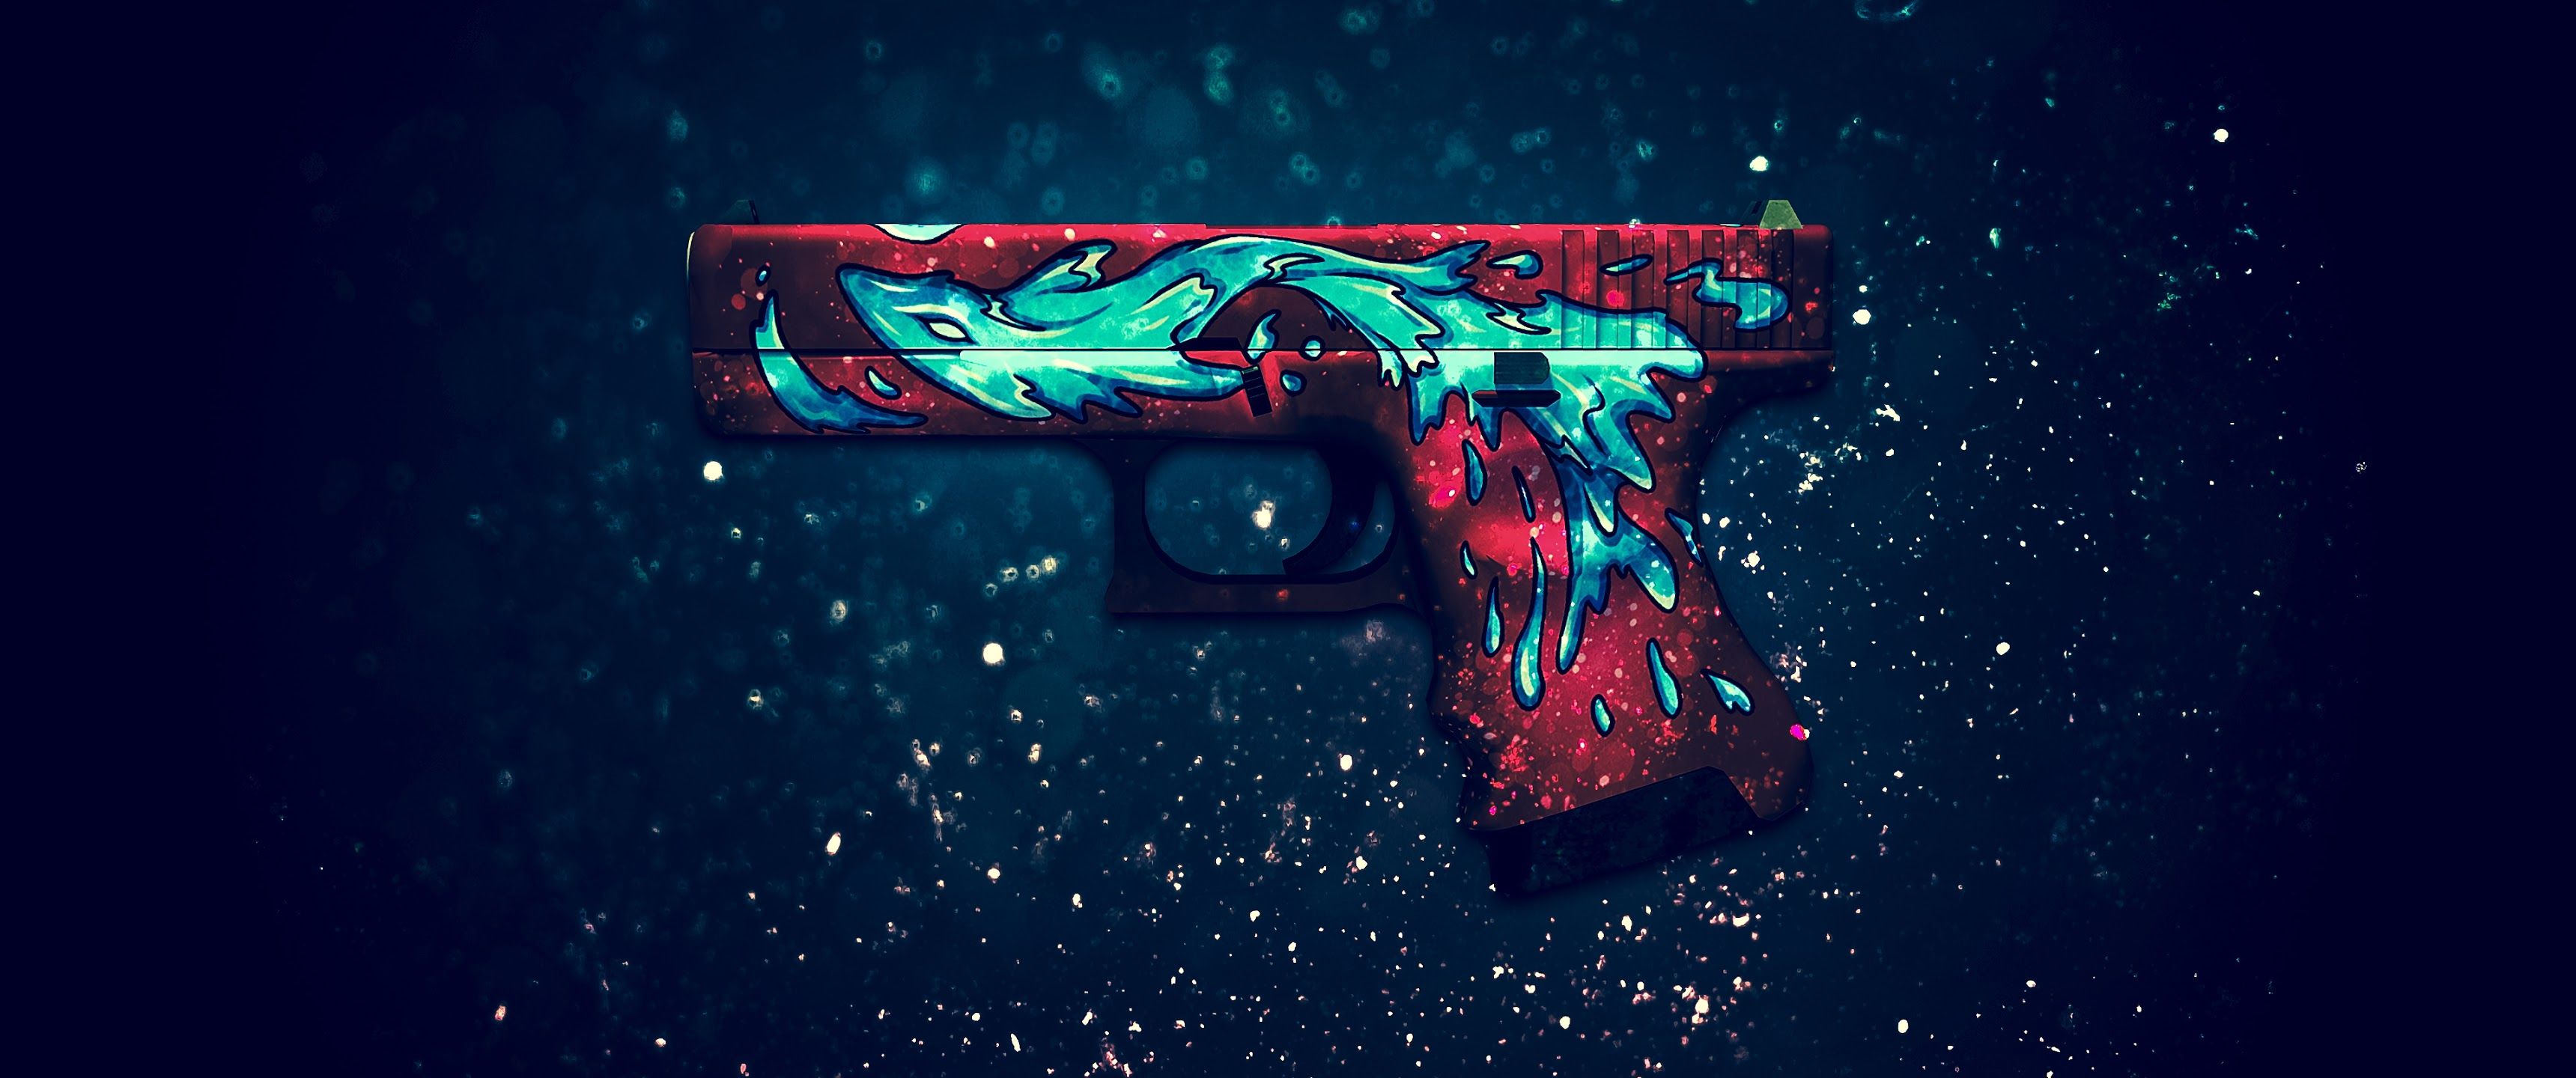 cs go skin Grizzly Glock download the last version for ipod